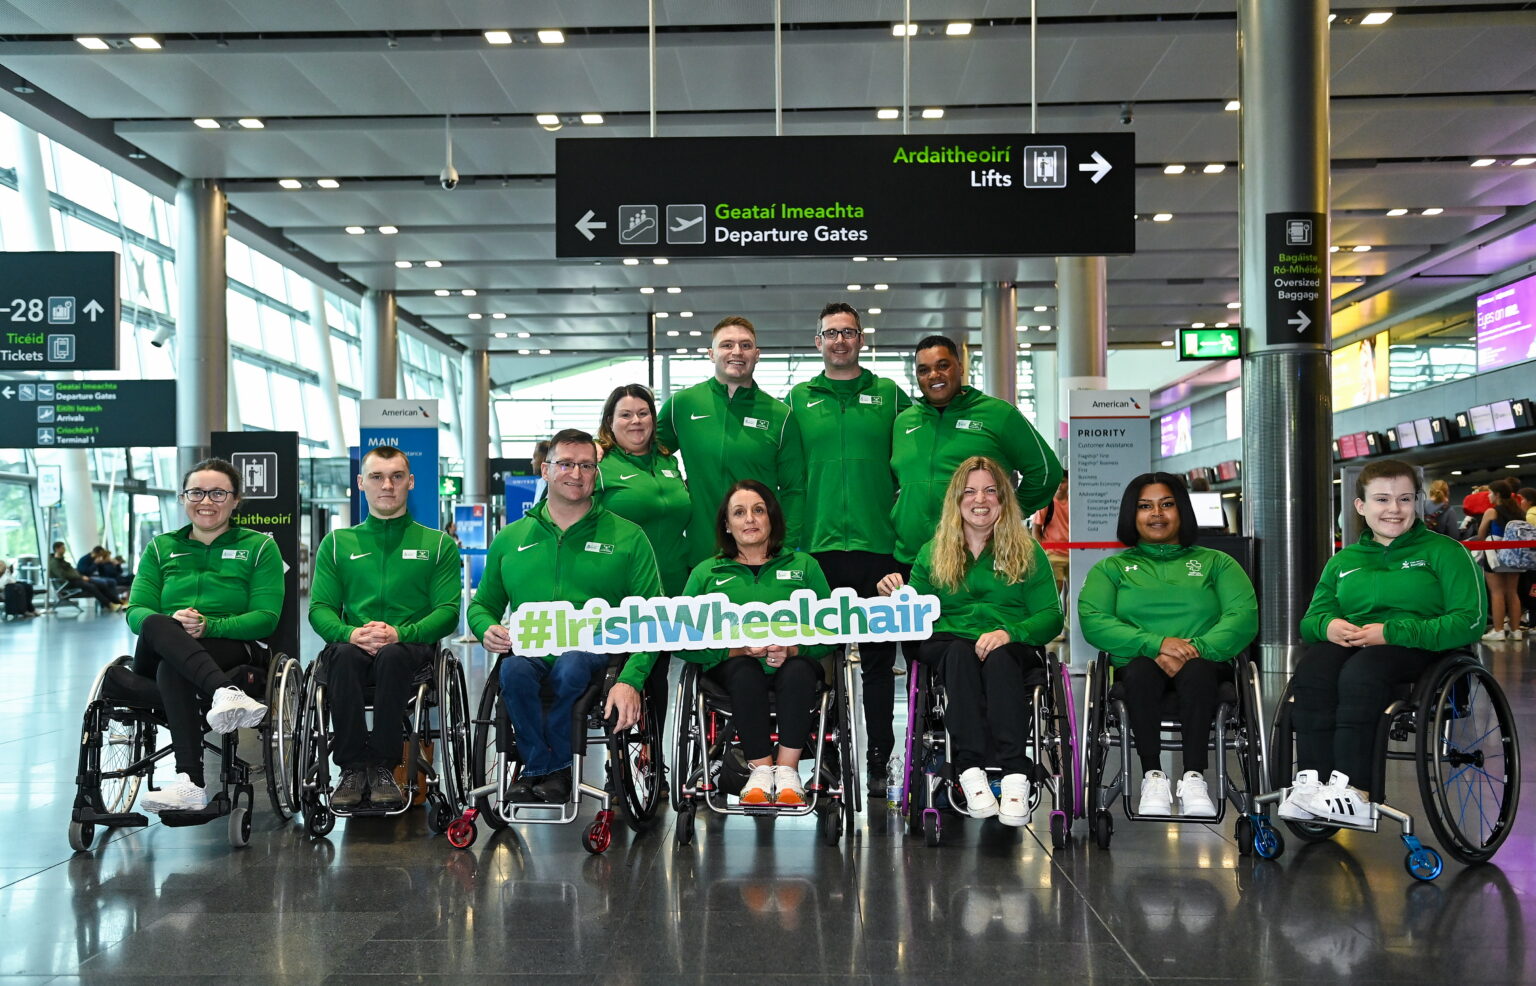 18 August 2023; Attendees, back row, from left, Aileen Buckley, from Ballydesmond in Cork, Sean Hughes, from Dunboyne in Meath, Tadhg Buckey, from Ballydesmond in Cork, and Denver Arendse, from Mullagh in Cavan, and front row, from left, Casey Fitzgerald, from Mullagh in Cavan, Ruairí Devlin, from Kinsale in Cork, Rory Guerin, from Tralee in Kerry, Angela Long, from Togher in Cork, Nicola Dore, from Kilcornan in Limerick, Britney Arendse, from Mullagh in Cavan, and Niamh Buckley, from Ballydesmond in Cork, pictured at Dublin Airport as Irish Wheelchair Association Sport sends largest Irish Para Powerlifting Team to the 2023 World Championships in Dubai. Photo by Piaras Ó Mídheach/Sportsfile *** NO REPRODUCTION FEE ***